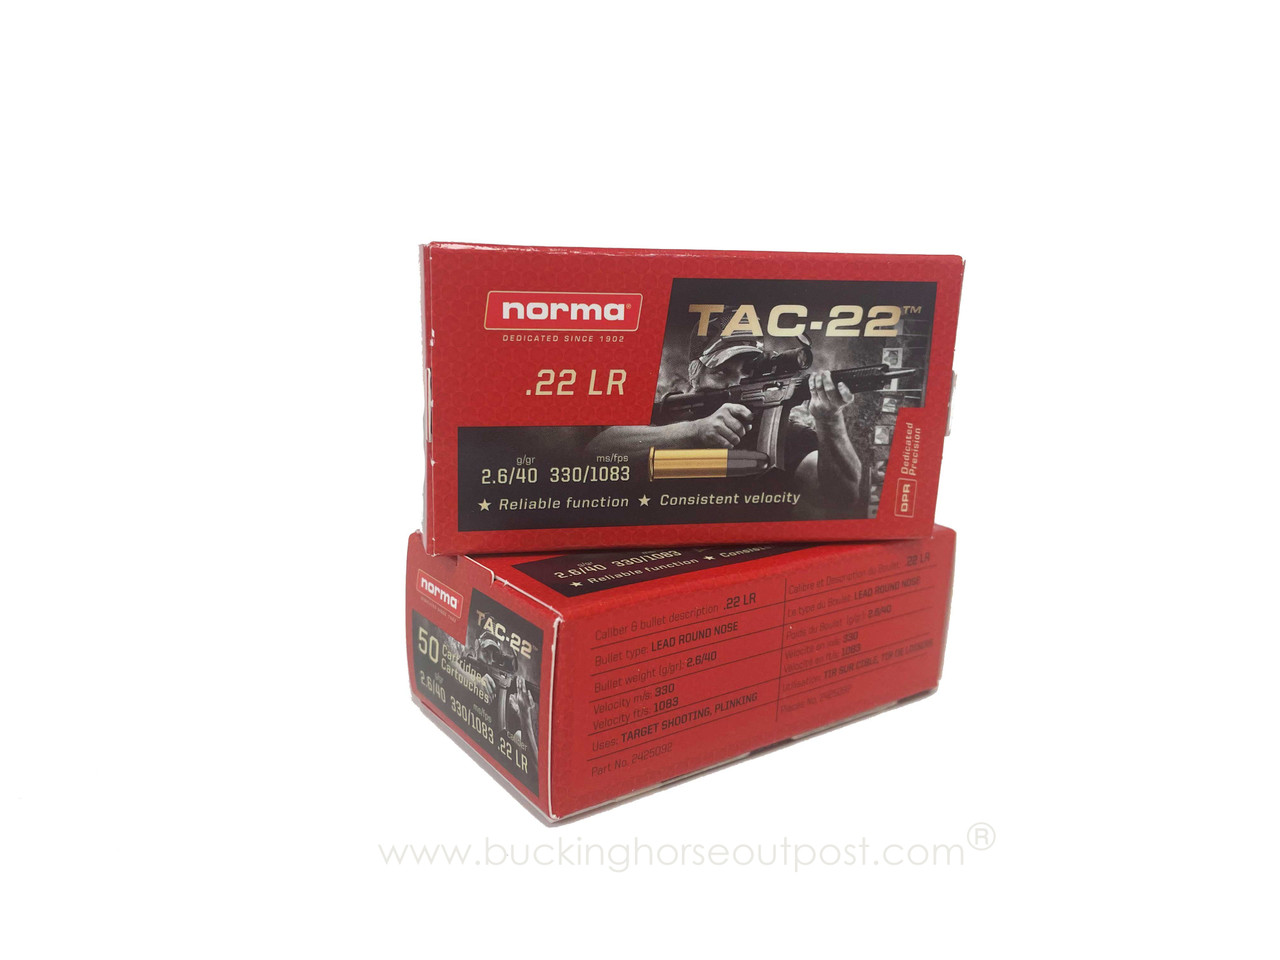 Norma TAC-22 .22 Long Rifle 40 Grain Lead Round Nose 50rds Per Box (2425092)- FREE SHIPPING ON ORDERS OVER $175